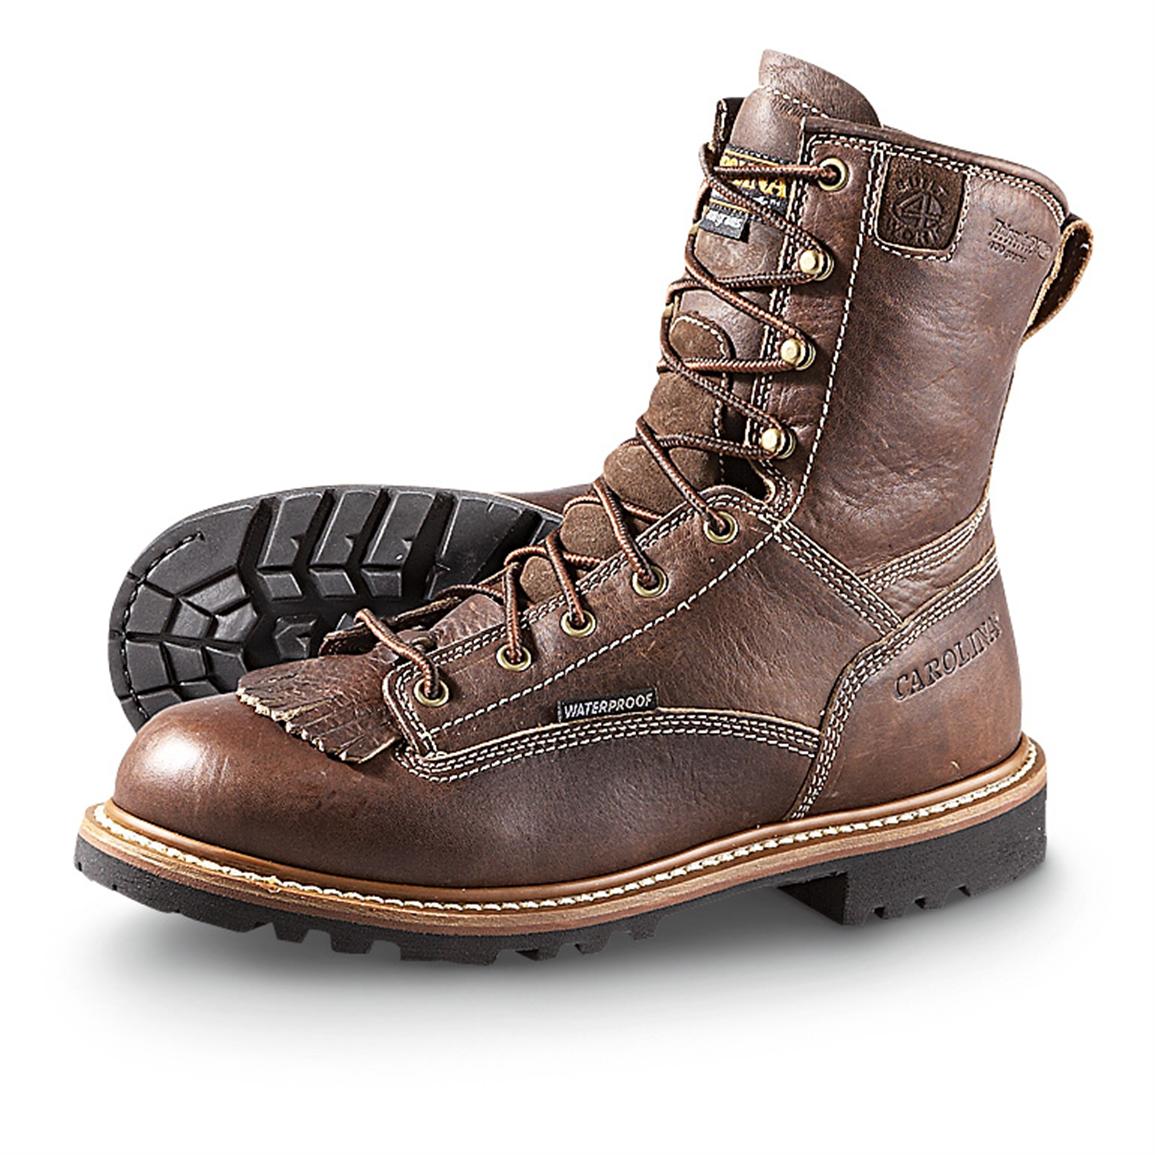 carolina grizzly work boots